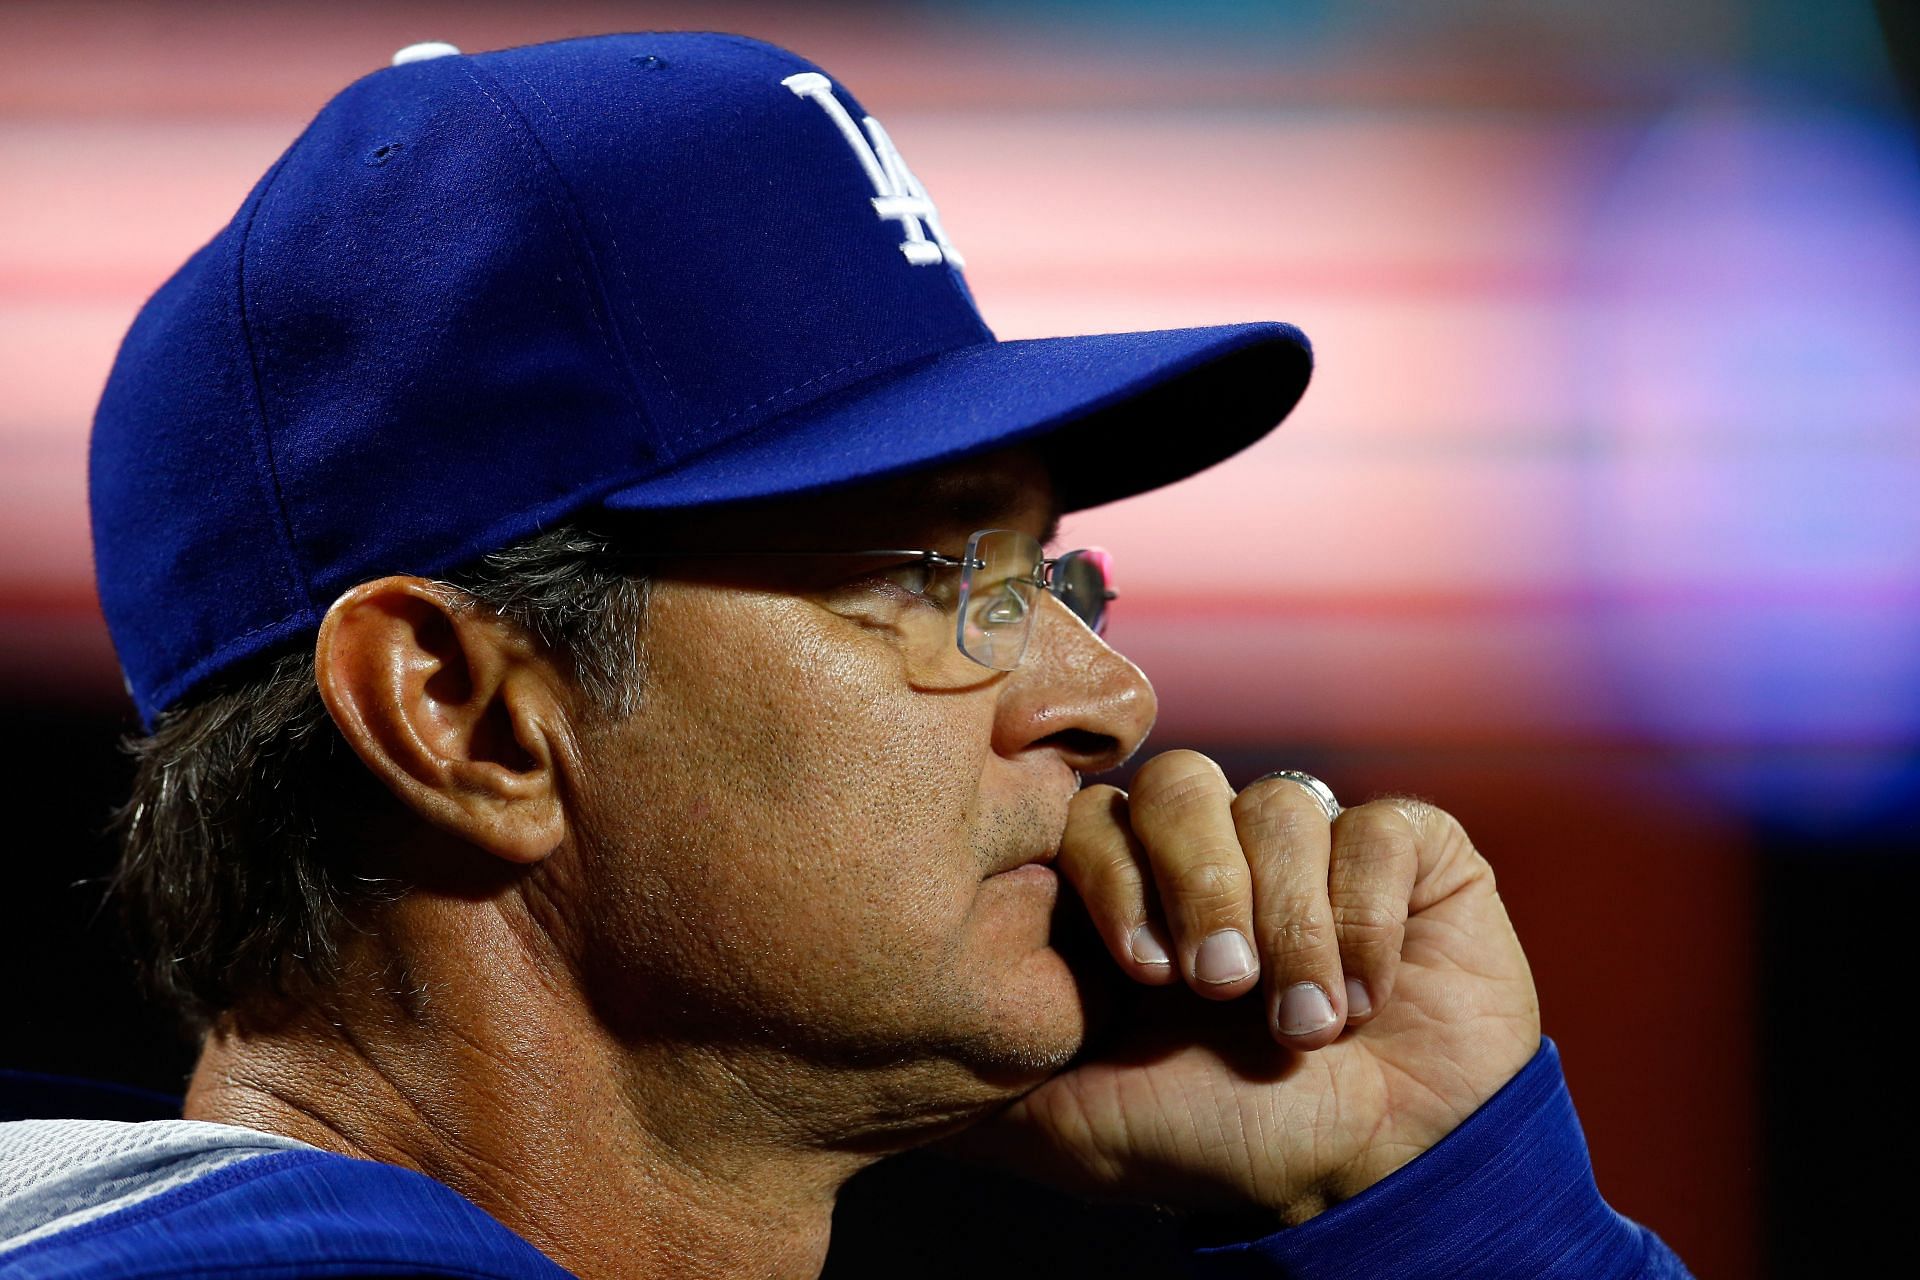 Division Series - Los Angeles Dodgers v New York Mets - Game Four: NEW YORK, NY - OCTOBER 13: Don Mattingly #8 of the Los Angeles Dodgers looks on from the dugout against the New York Mets during game four of the National League Division Series at Citi Field on October 13, 2015, in New York City. (Photo by Mike Stobe/Getty Images)